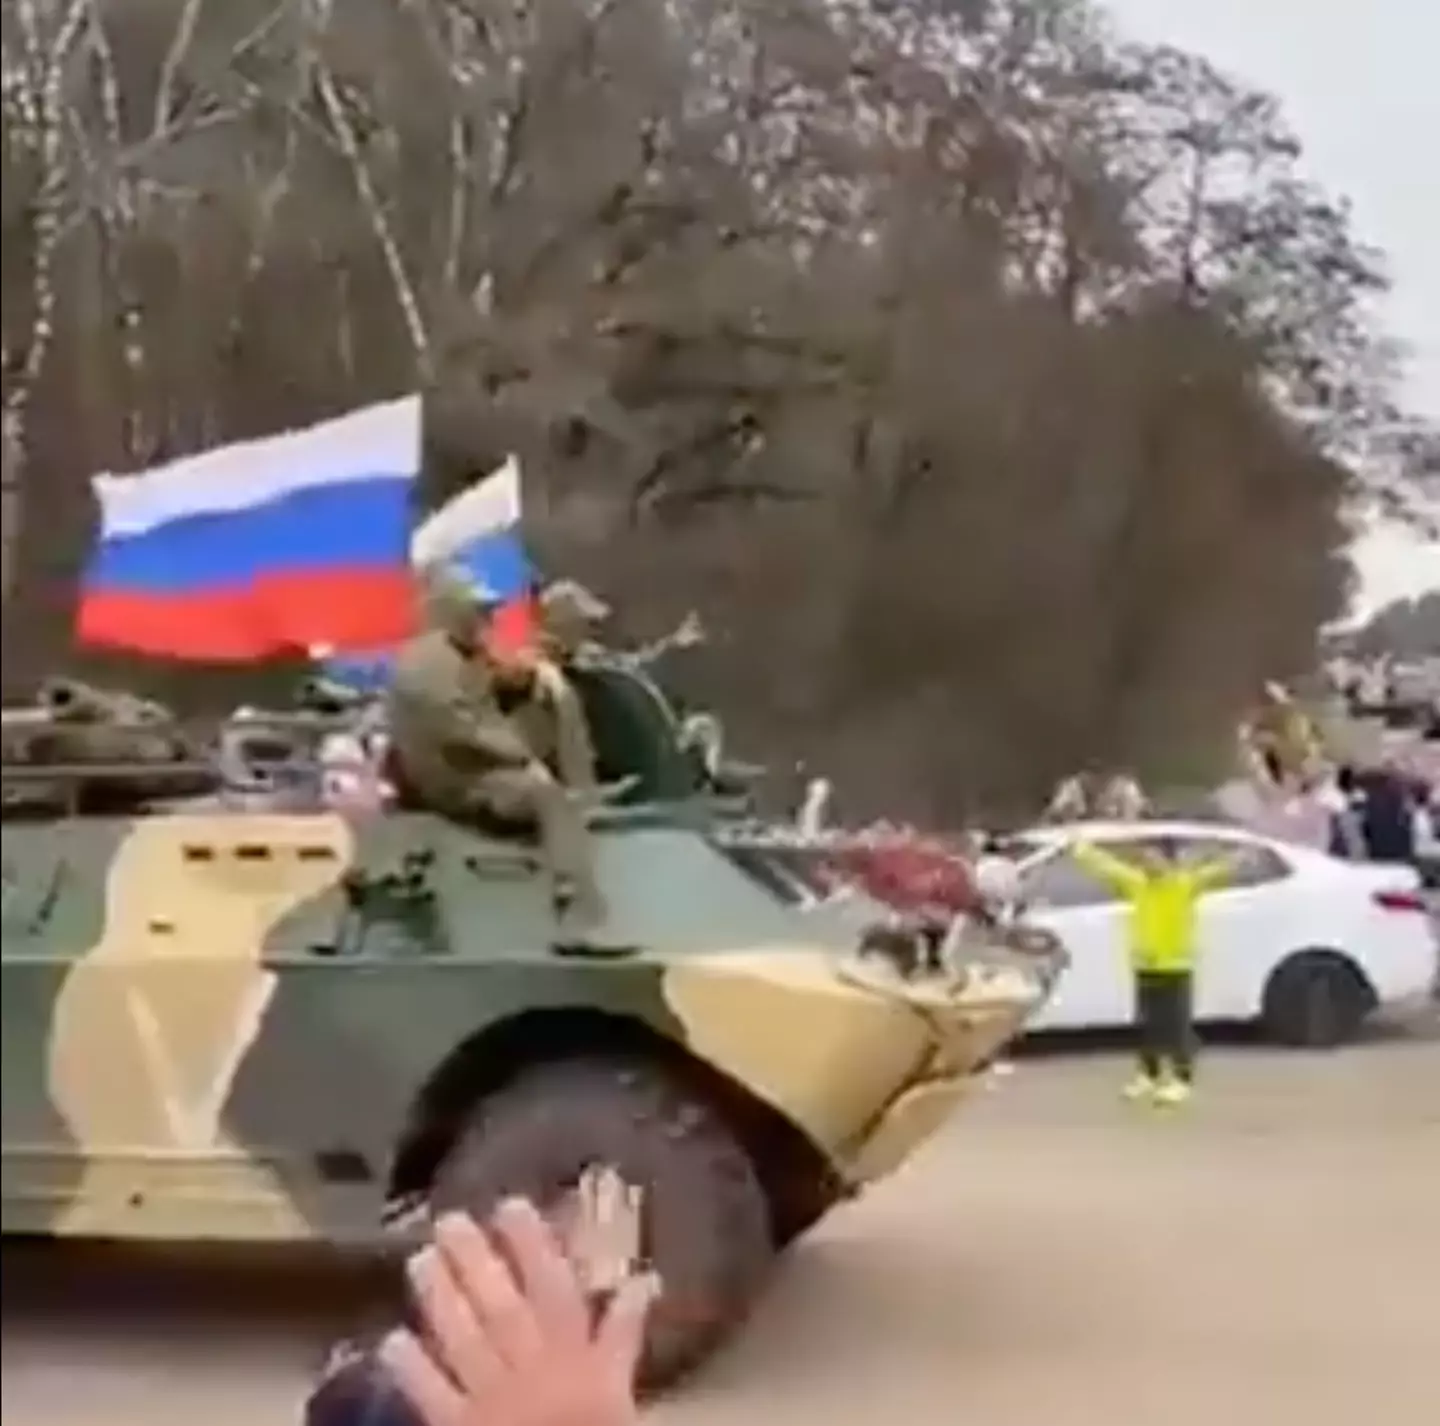 Russian civilians have been recorded cheering troops on as they go to fight in Ukraine.